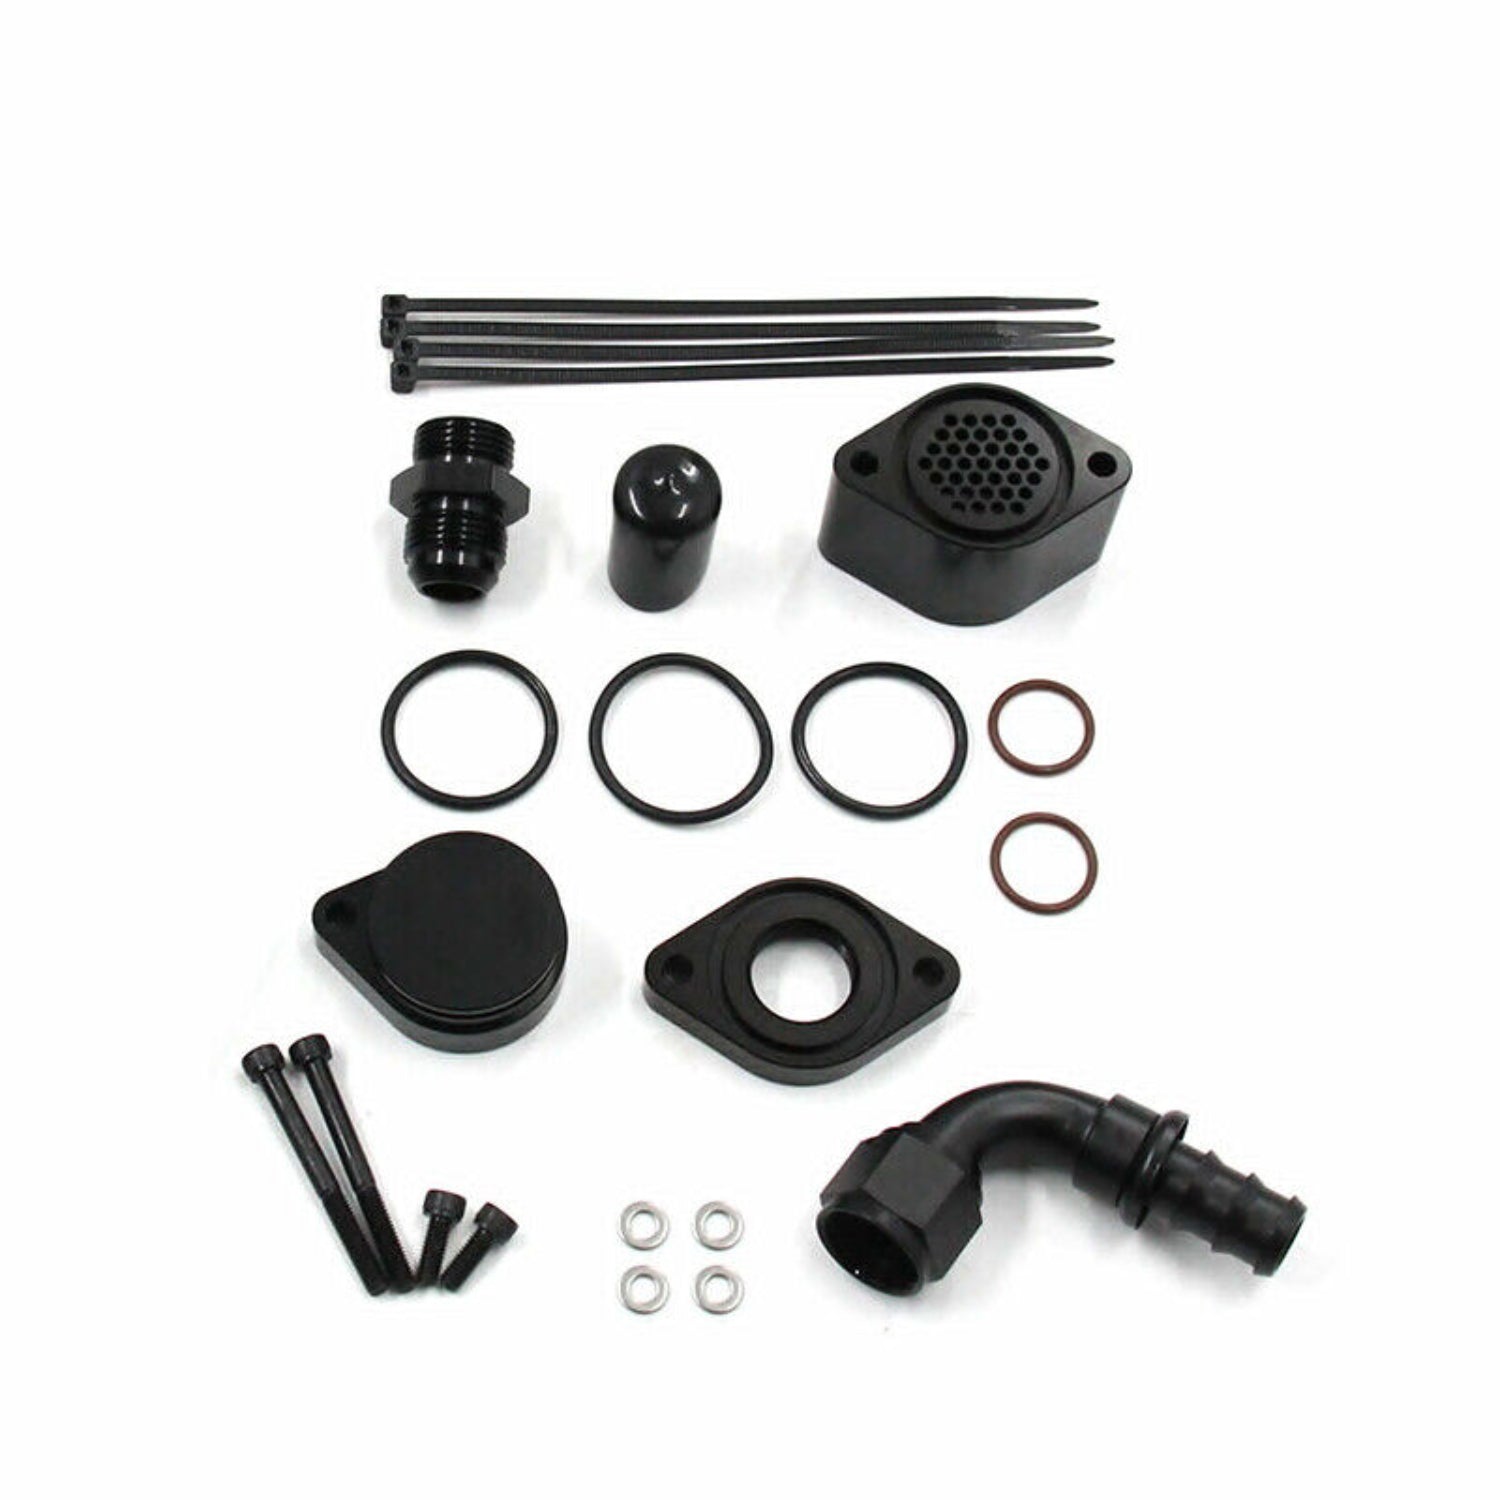 CCV PCV Reroute Engine Ventilation Kit for 2011-2020 6.7L Powerstroke Ford F250 F350 F450 F550